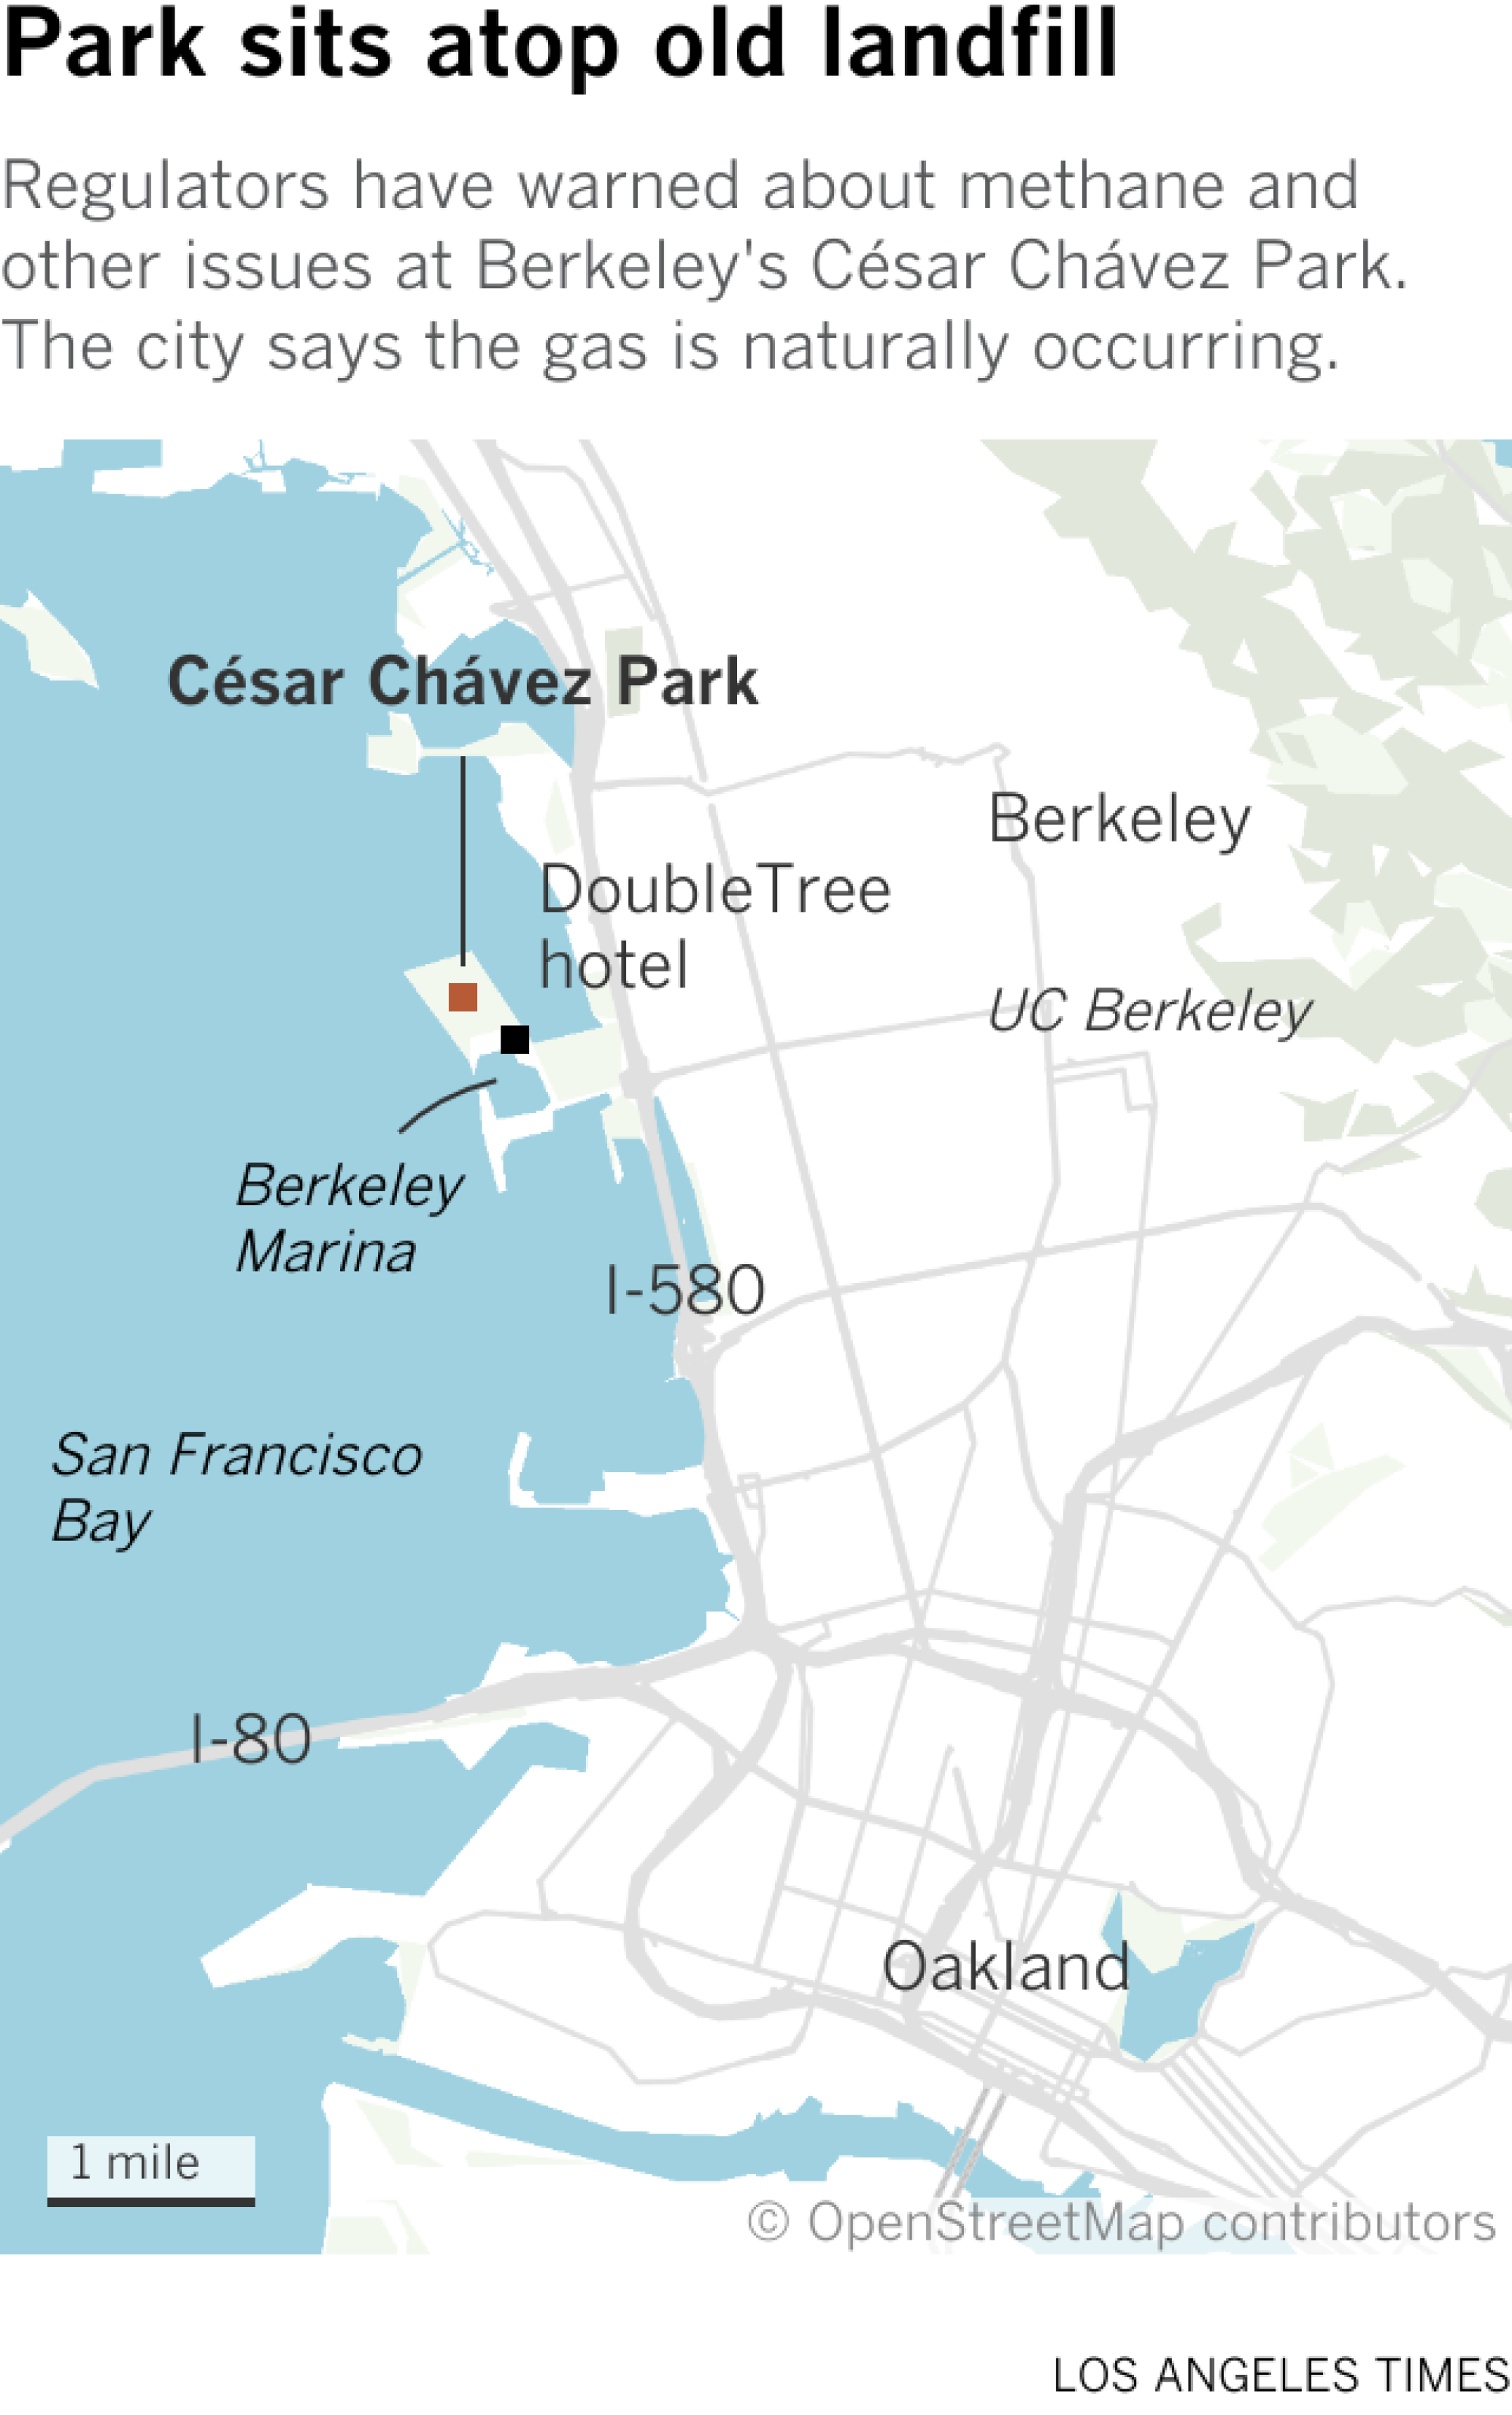 Map shows the location of César Chávez Park and the nearby DoubleTree hotel on the Berkeley Marina. The park is on the west side of Berkeley.